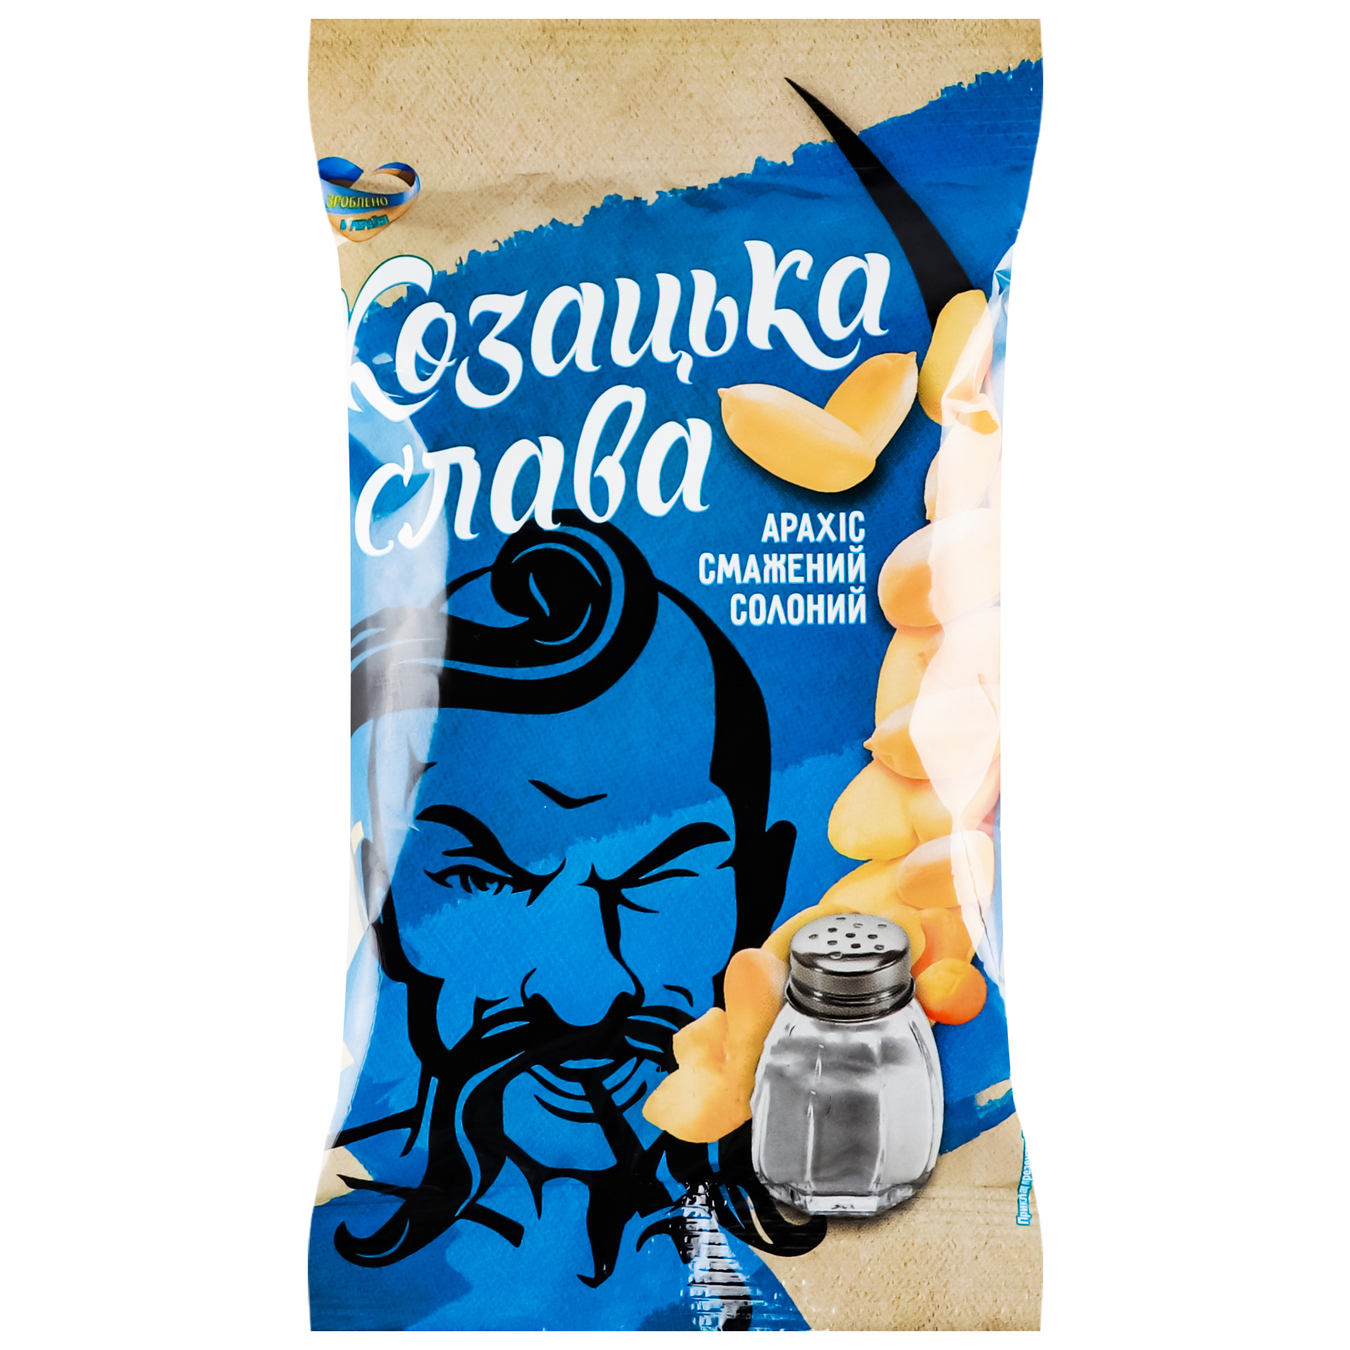 Peanuts Cossack glory fried salted 110g